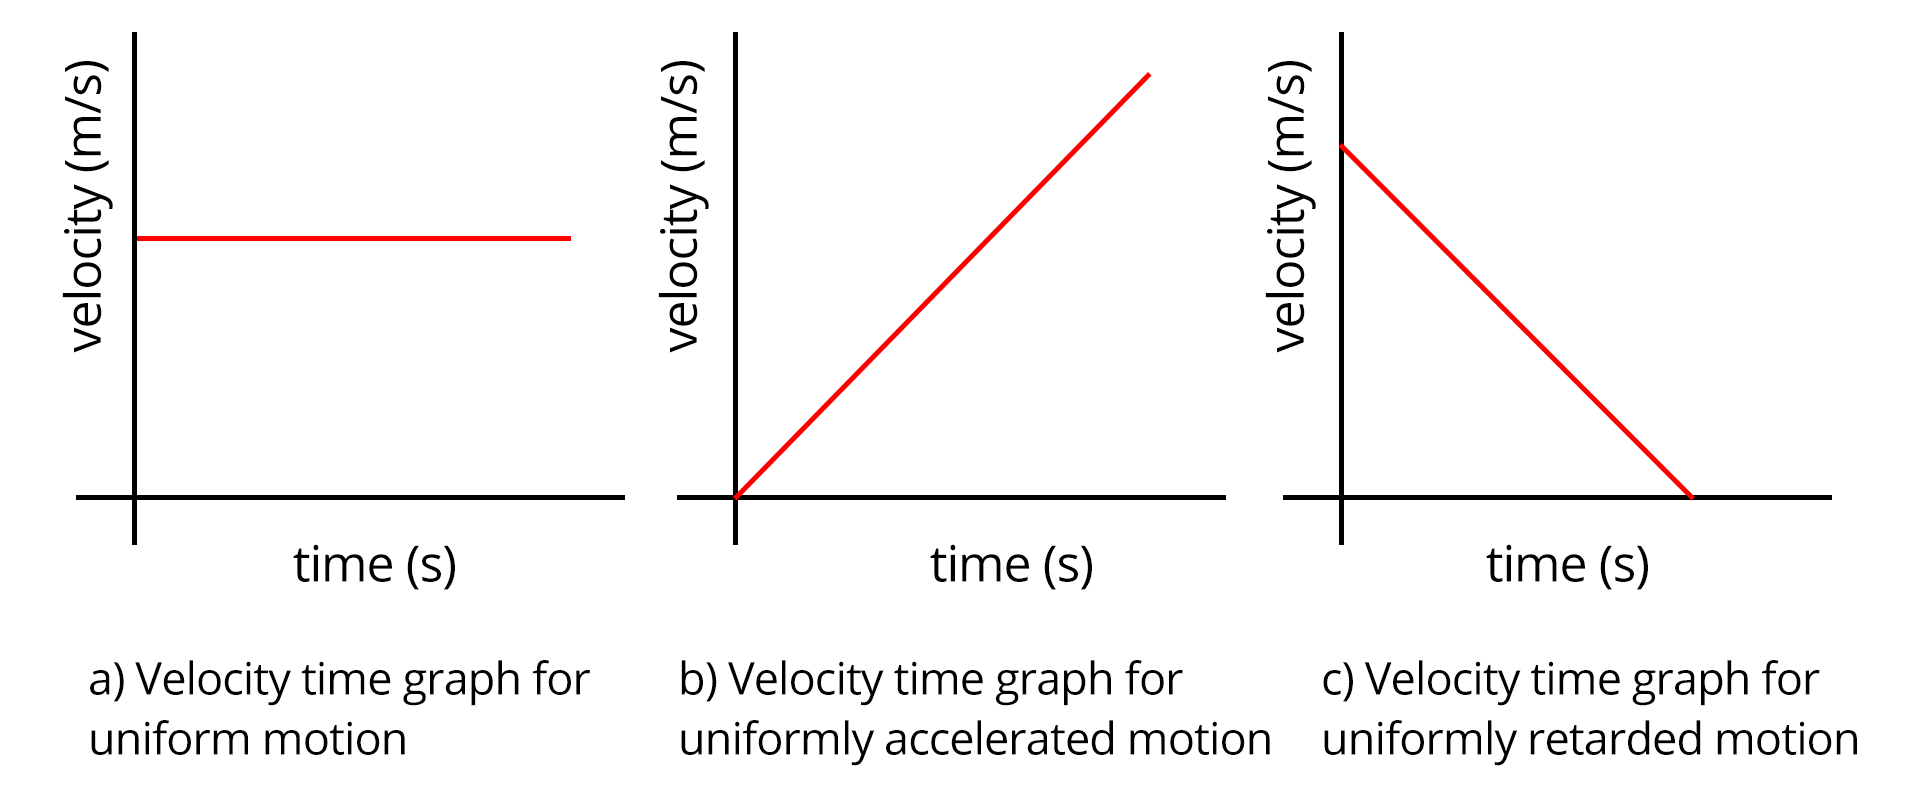 velocity-time graph for different types of motion